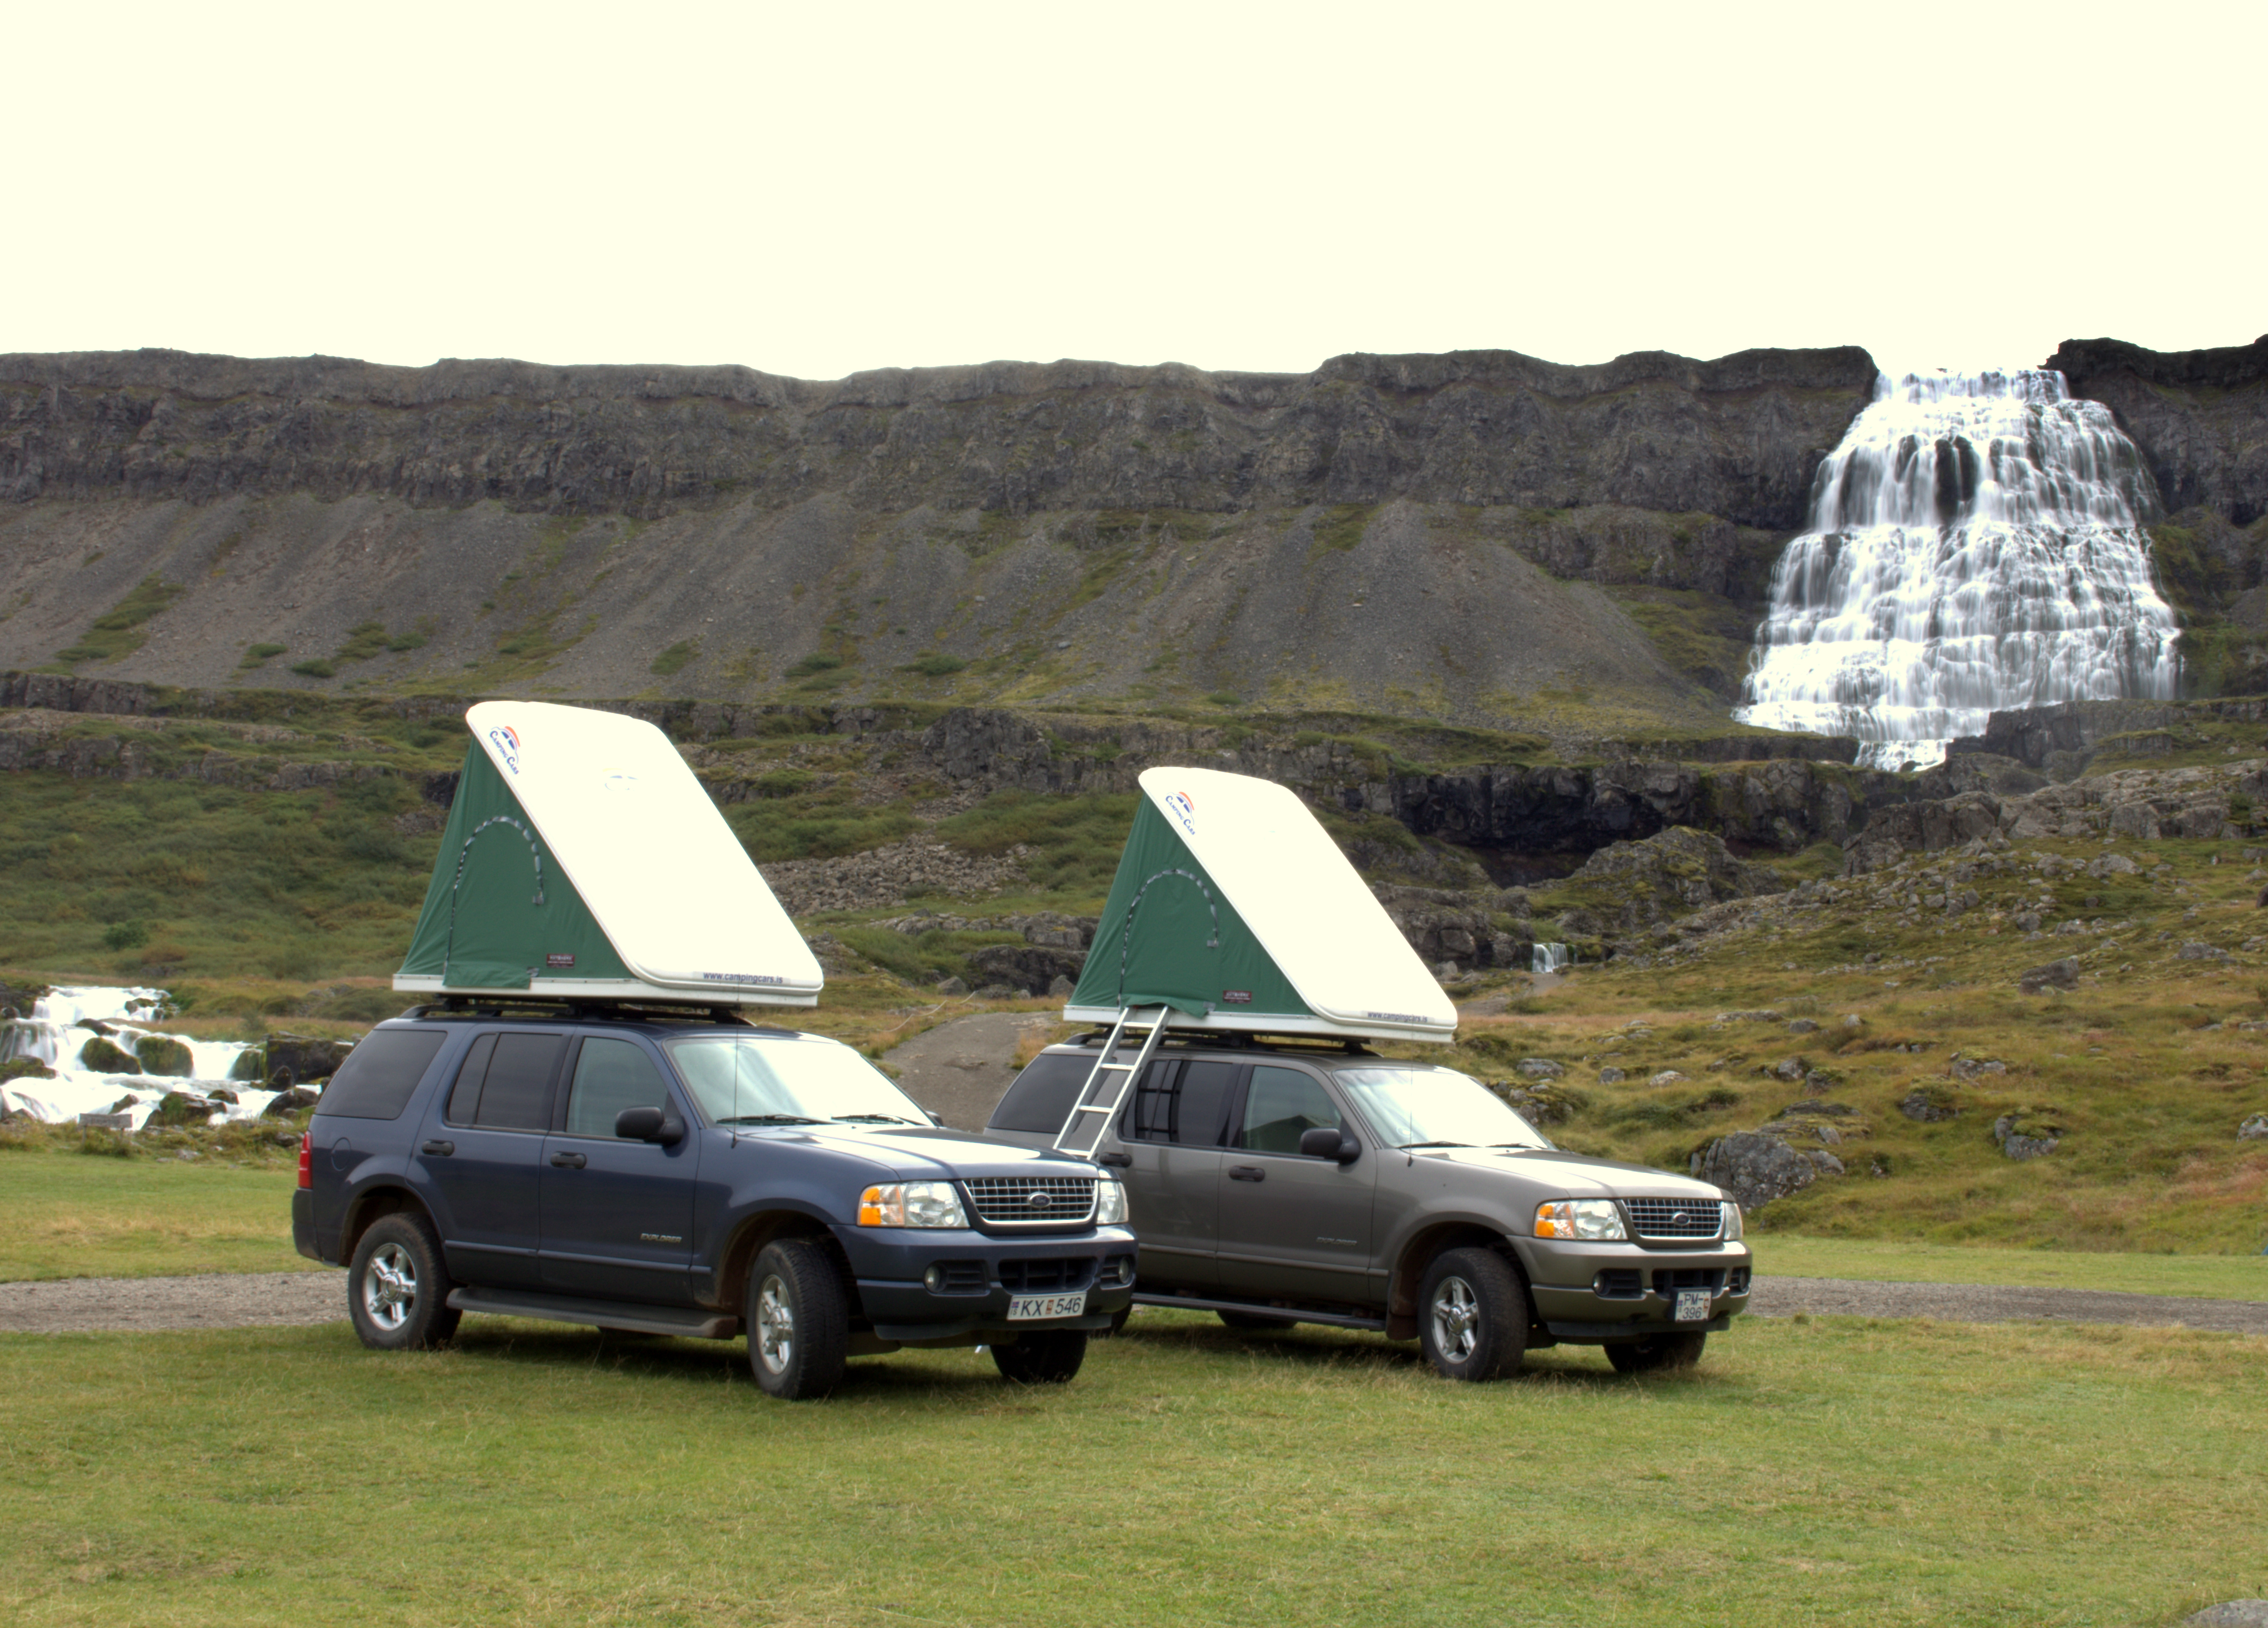 Ford explorer camping tents #4